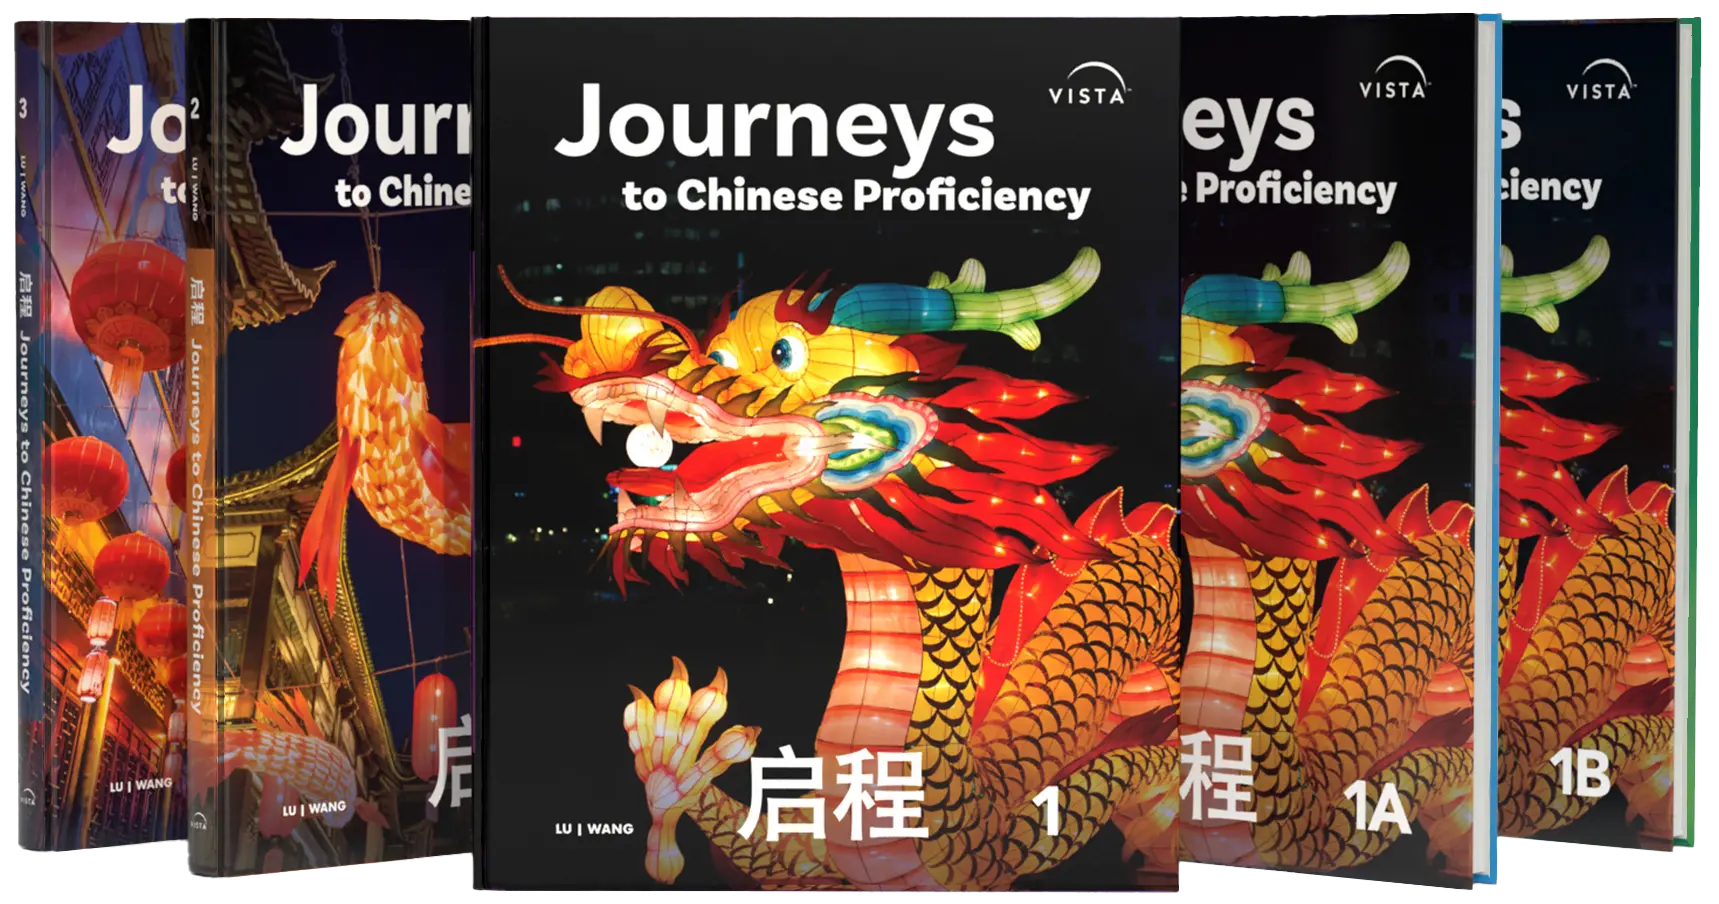 Covers of Journeys books.